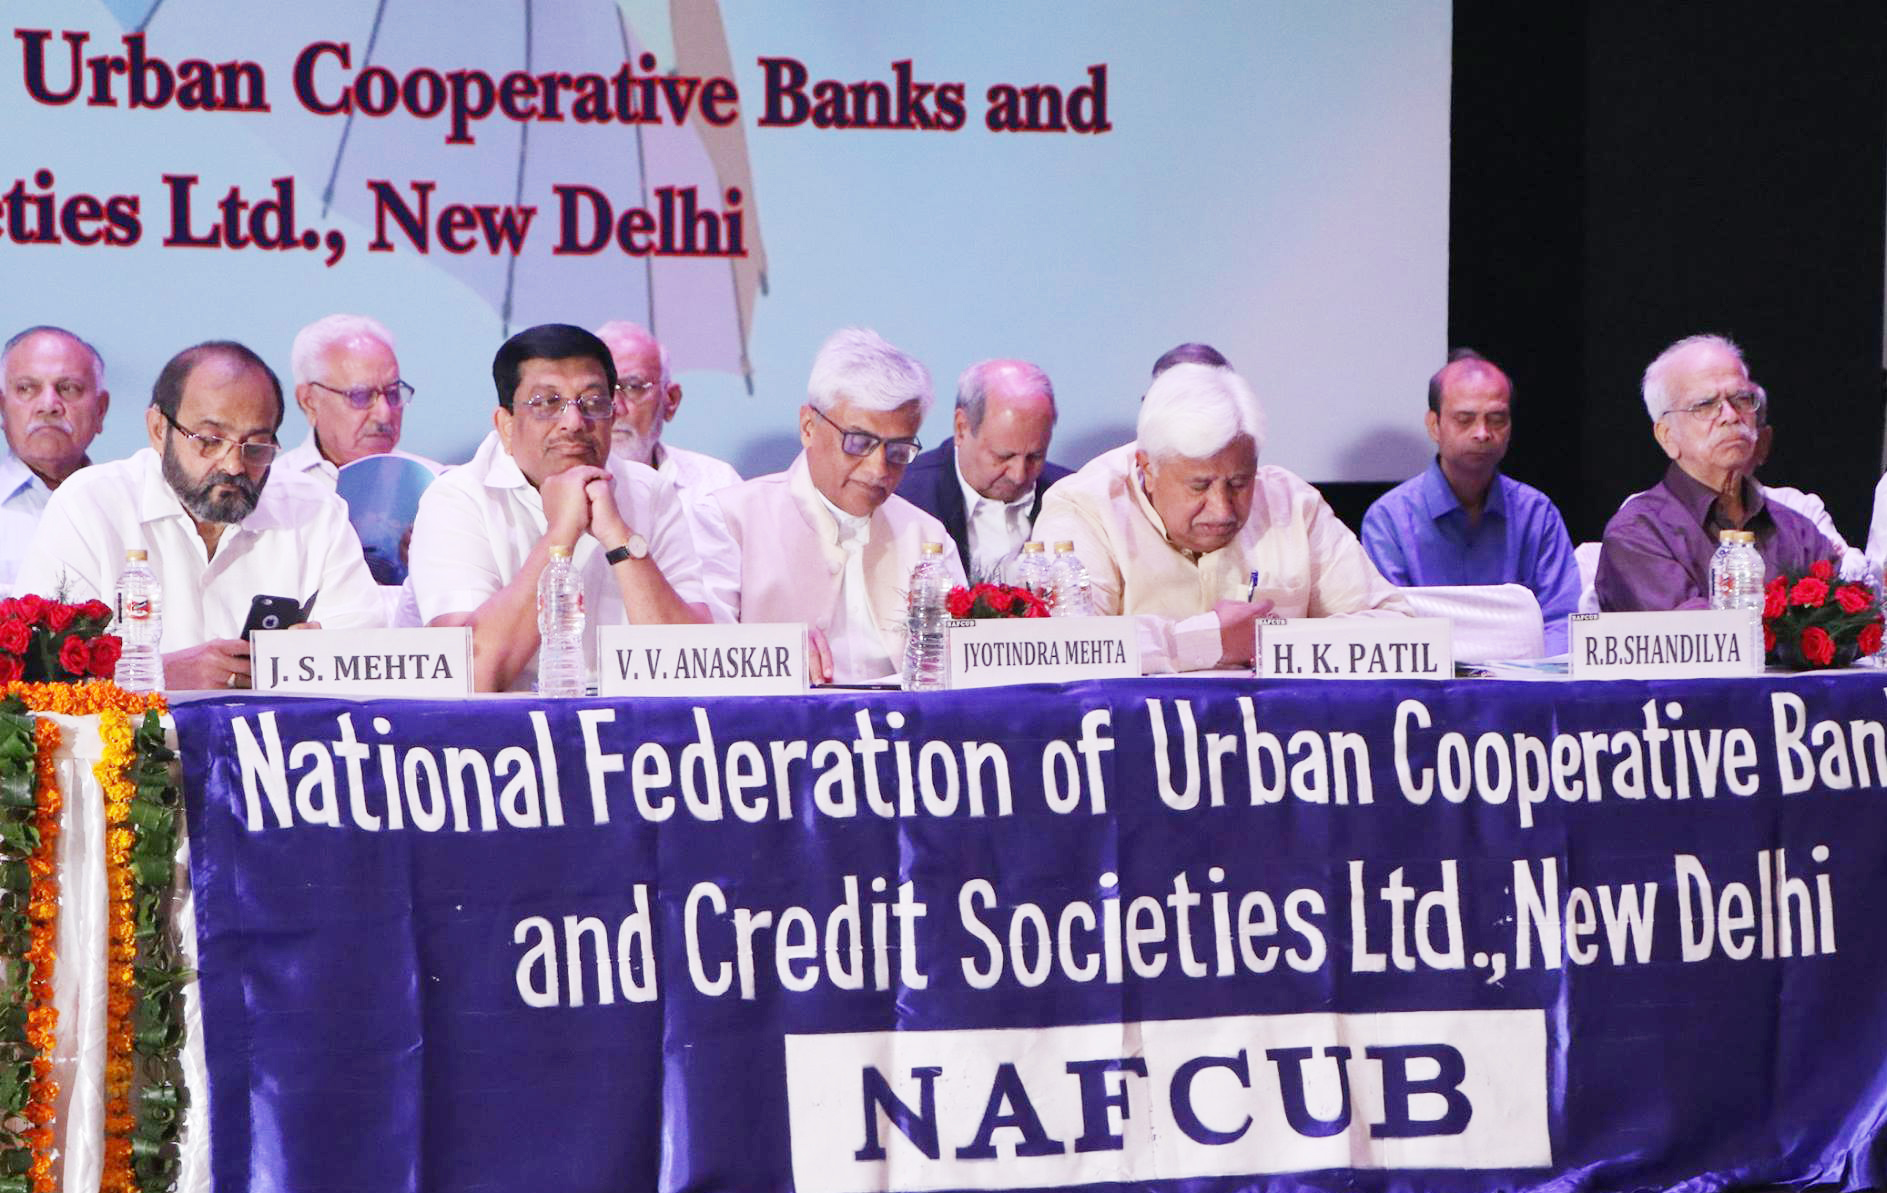 NAFCUB Board meets at NCUI, announcement of election dates likely – Indian Cooperative